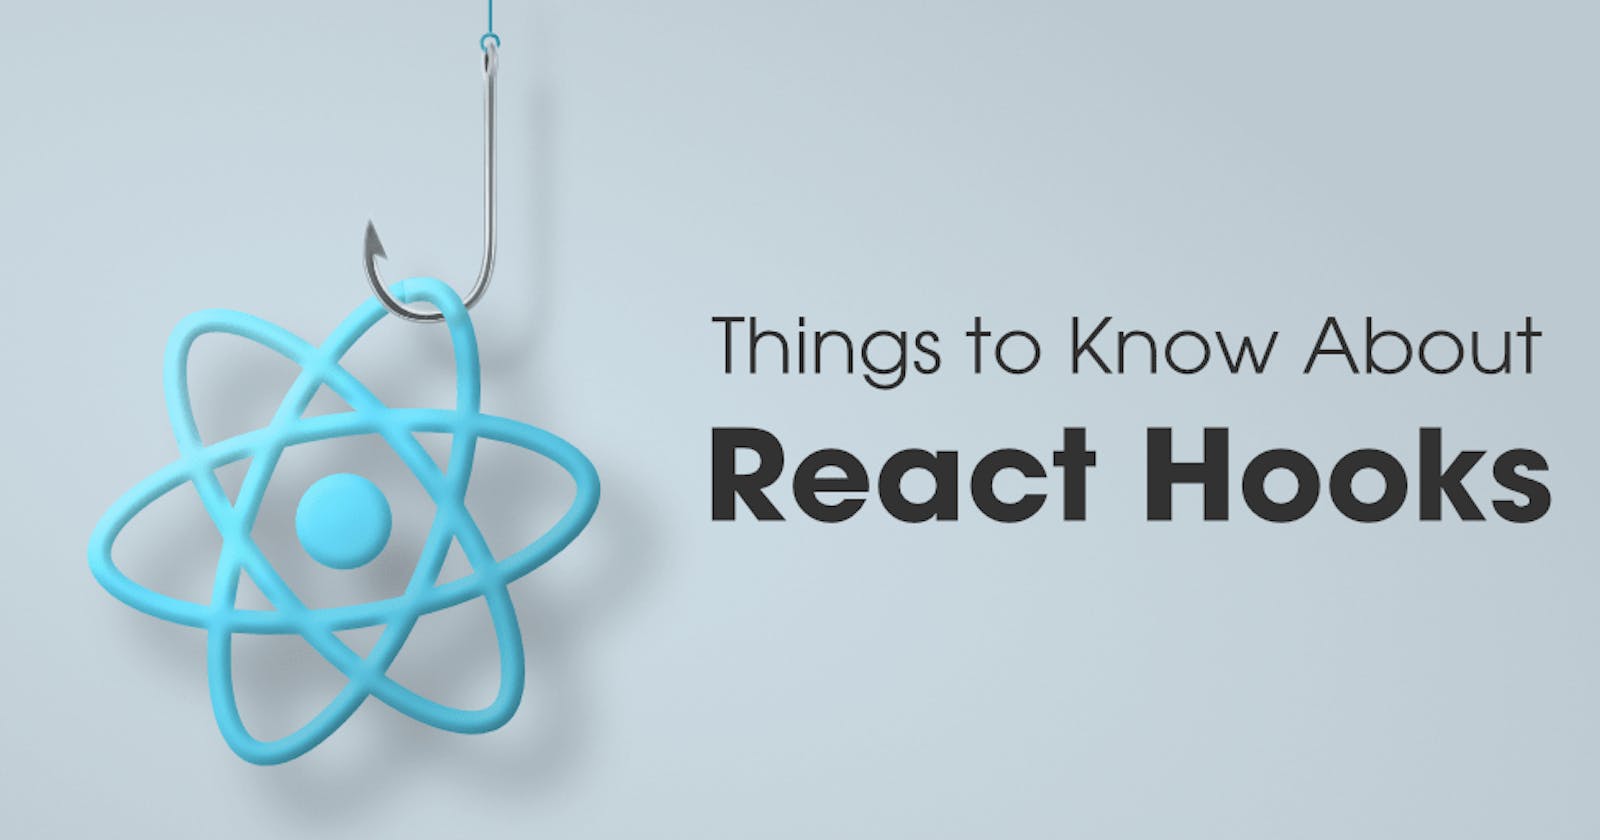 Conquer the React hooks